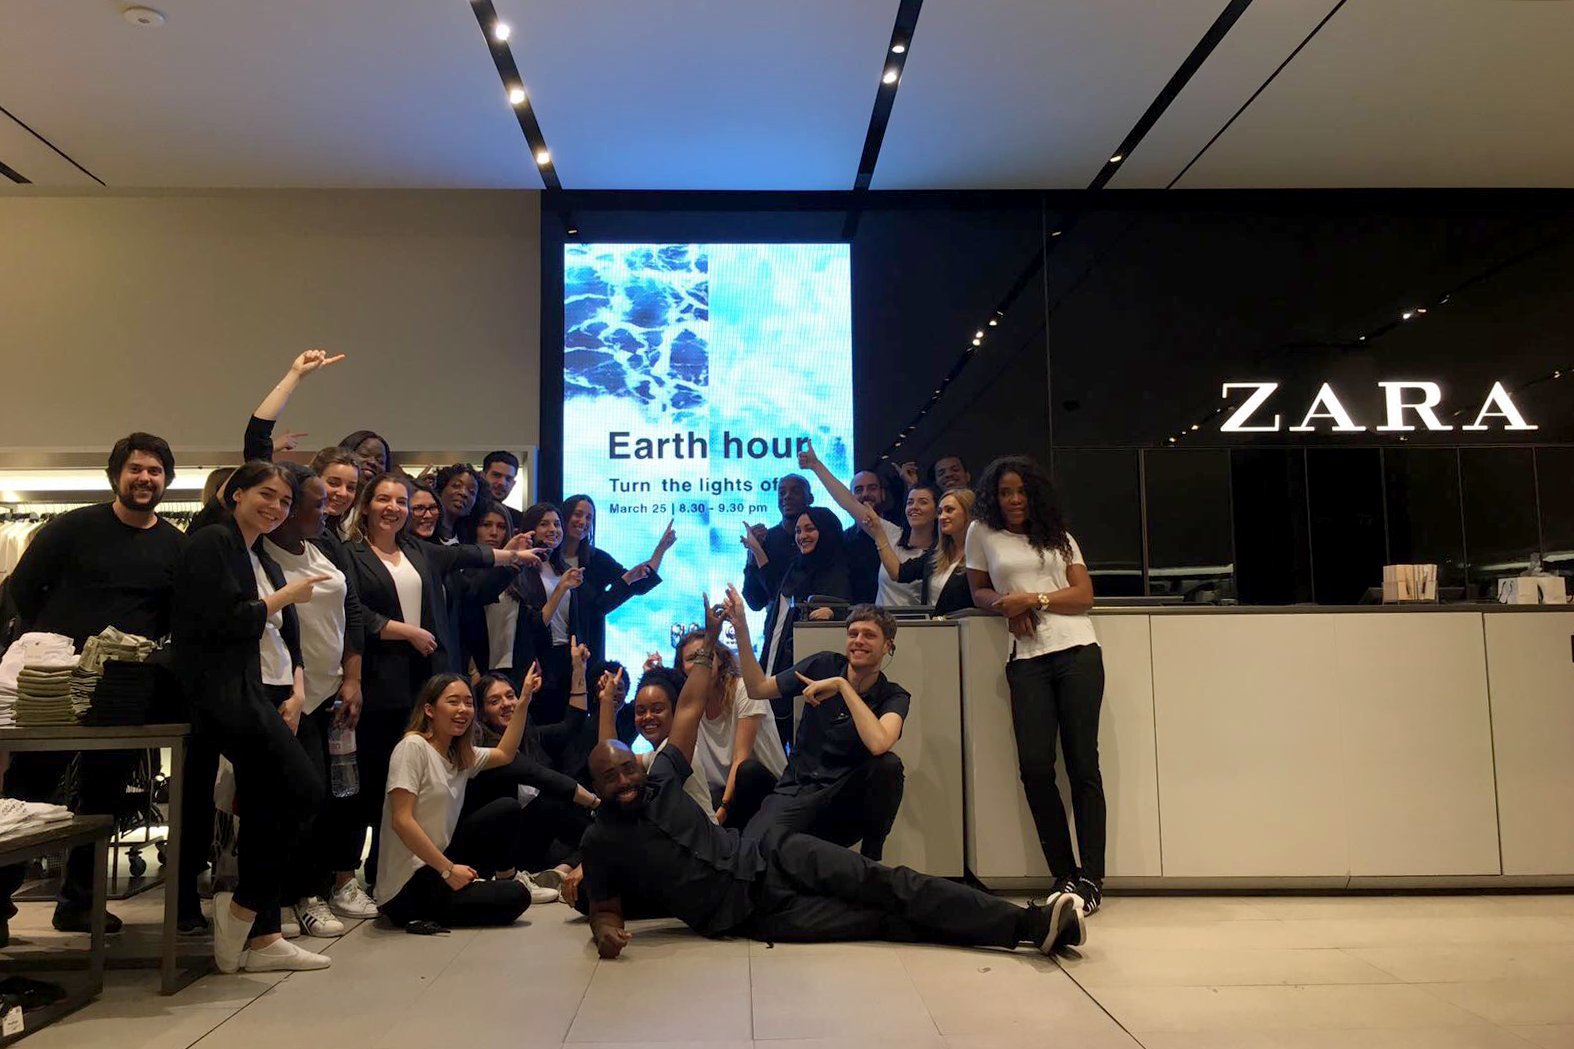 Inditex Careers on Twitter: "Thanks to our @ZARA team in Oxford St. East  London for this #EarthHour picture! #whatmakesyouunique  https://t.co/ZGitptJdmj" / Twitter